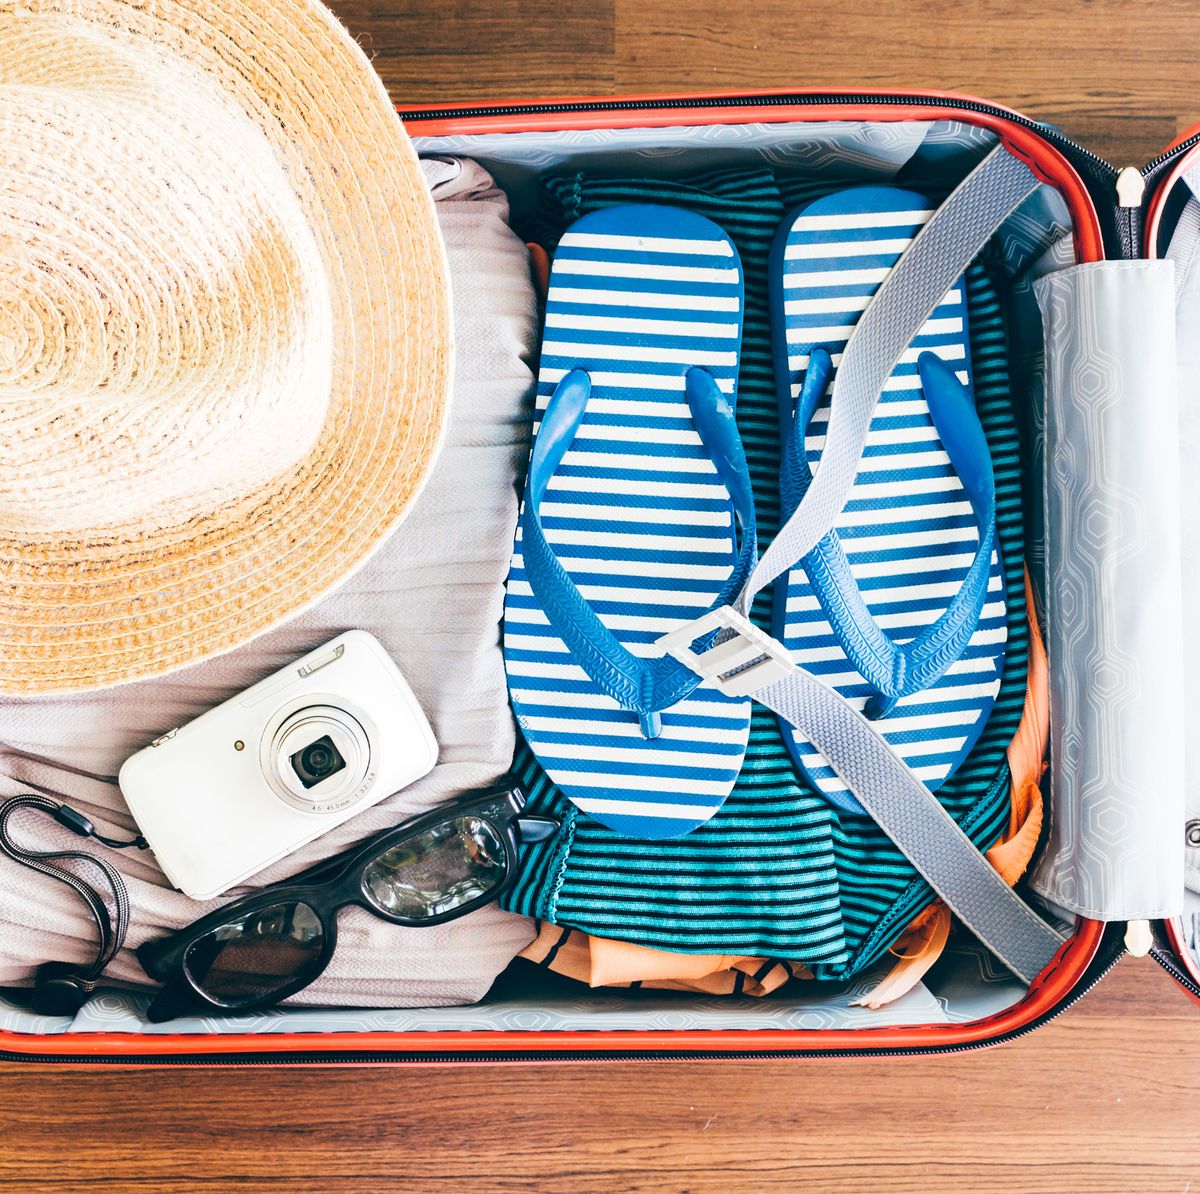 The 7 Travel Essentials One Writer Brings on Every Trip